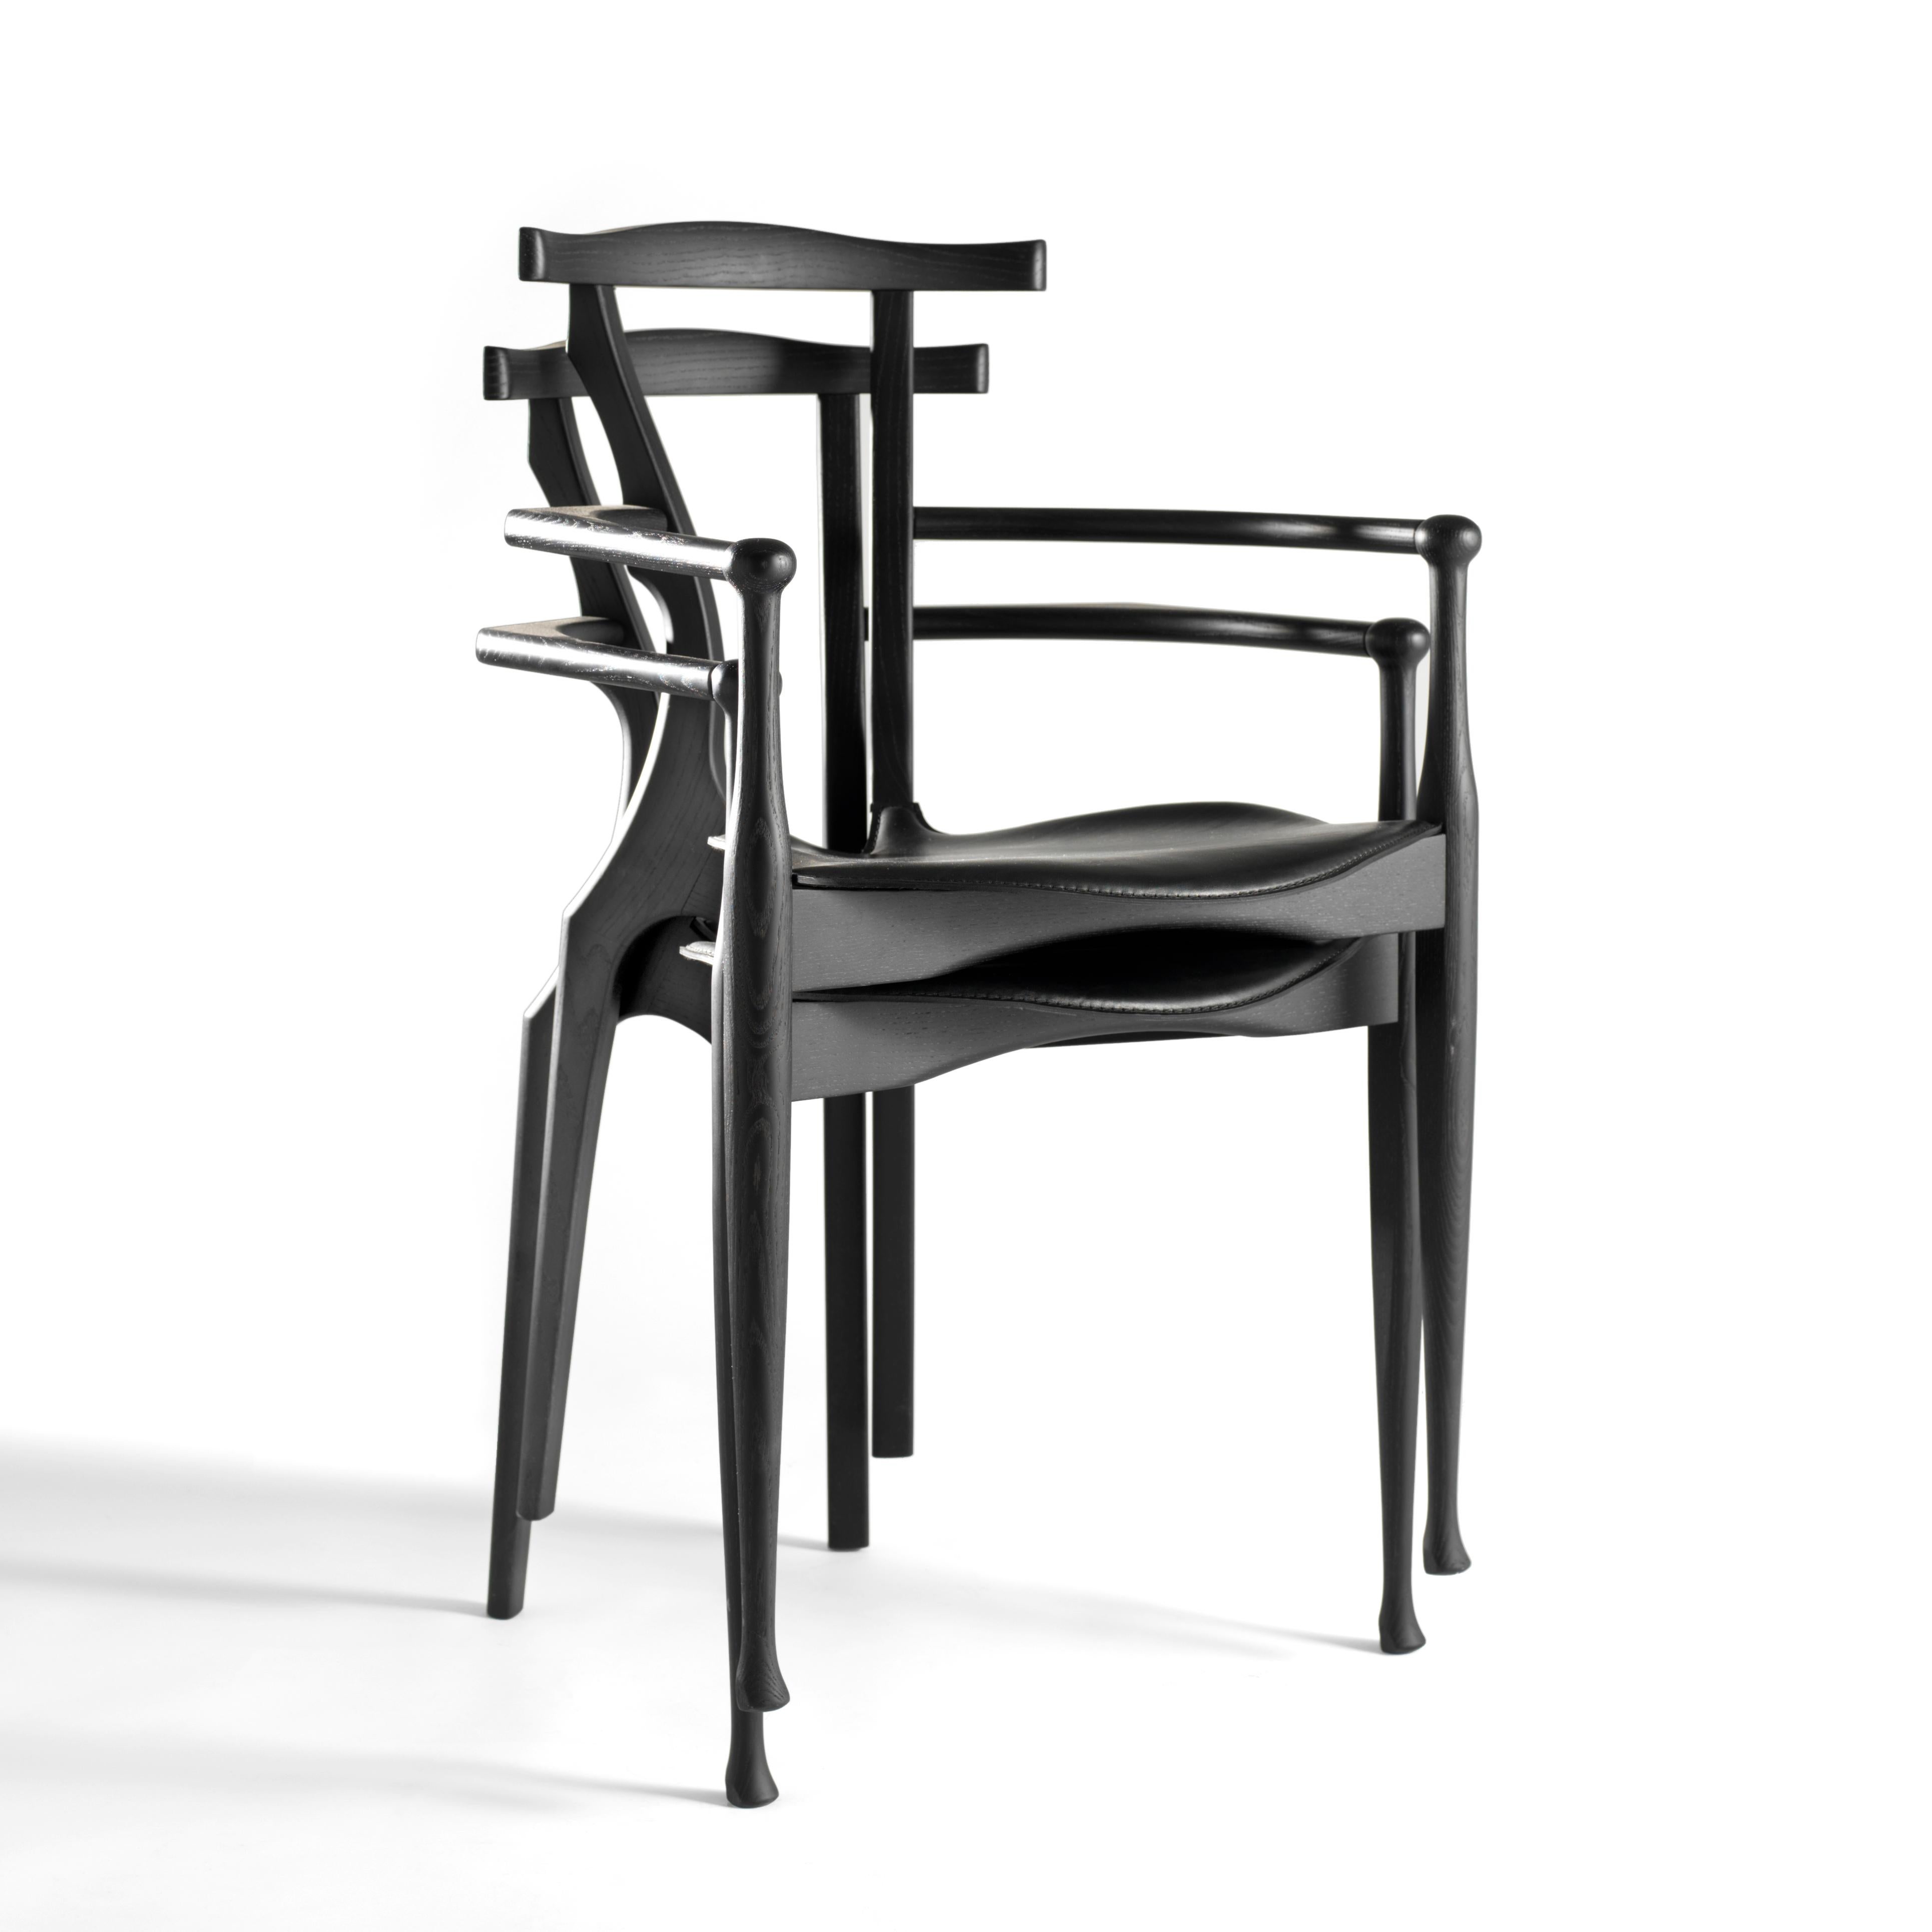 Set of 8 Black Gaulino Chairs Chair by Oscar Tusquets In New Condition For Sale In Barcelona, Barcelona